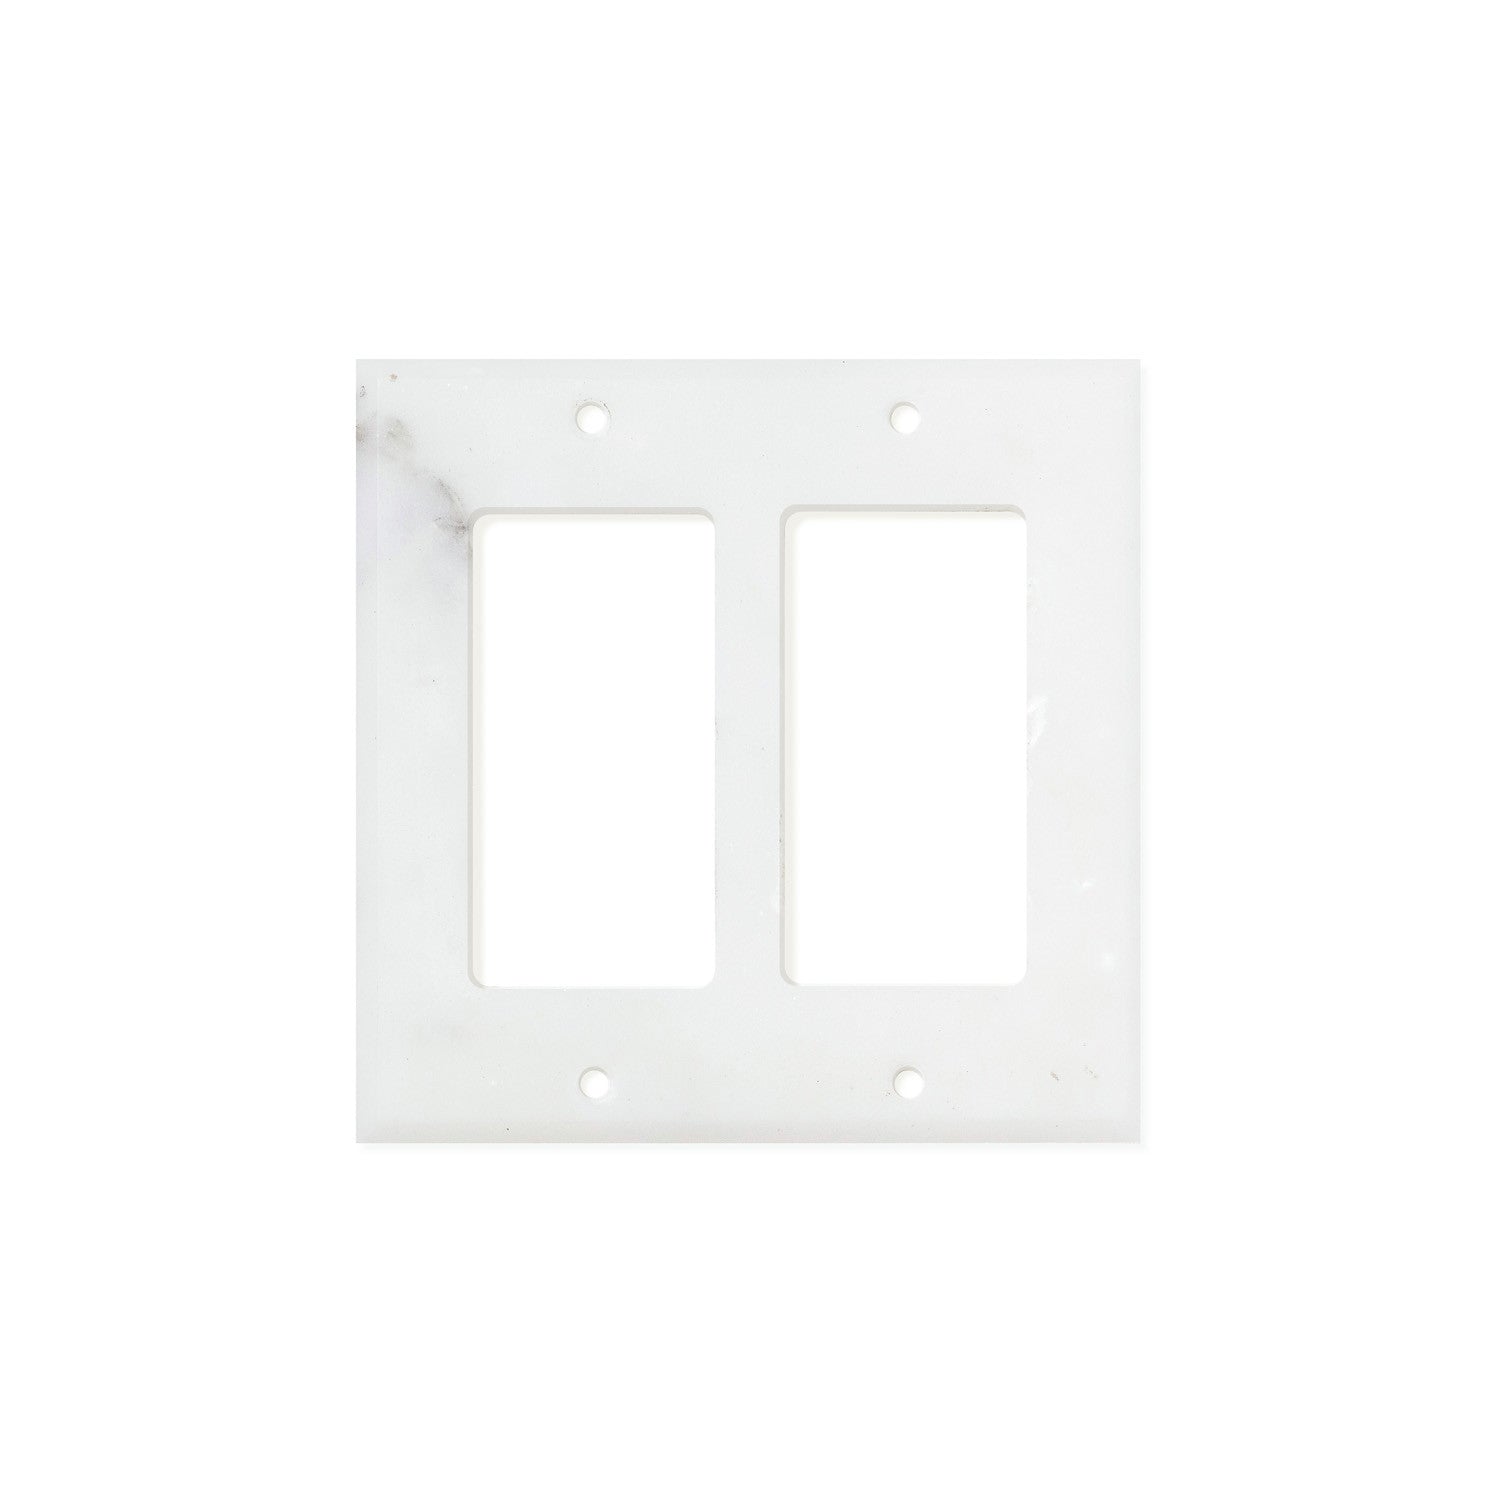 Calacatta Gold Marble Switch Plate Cover, Honed (2 ROCKER) - Tilephile